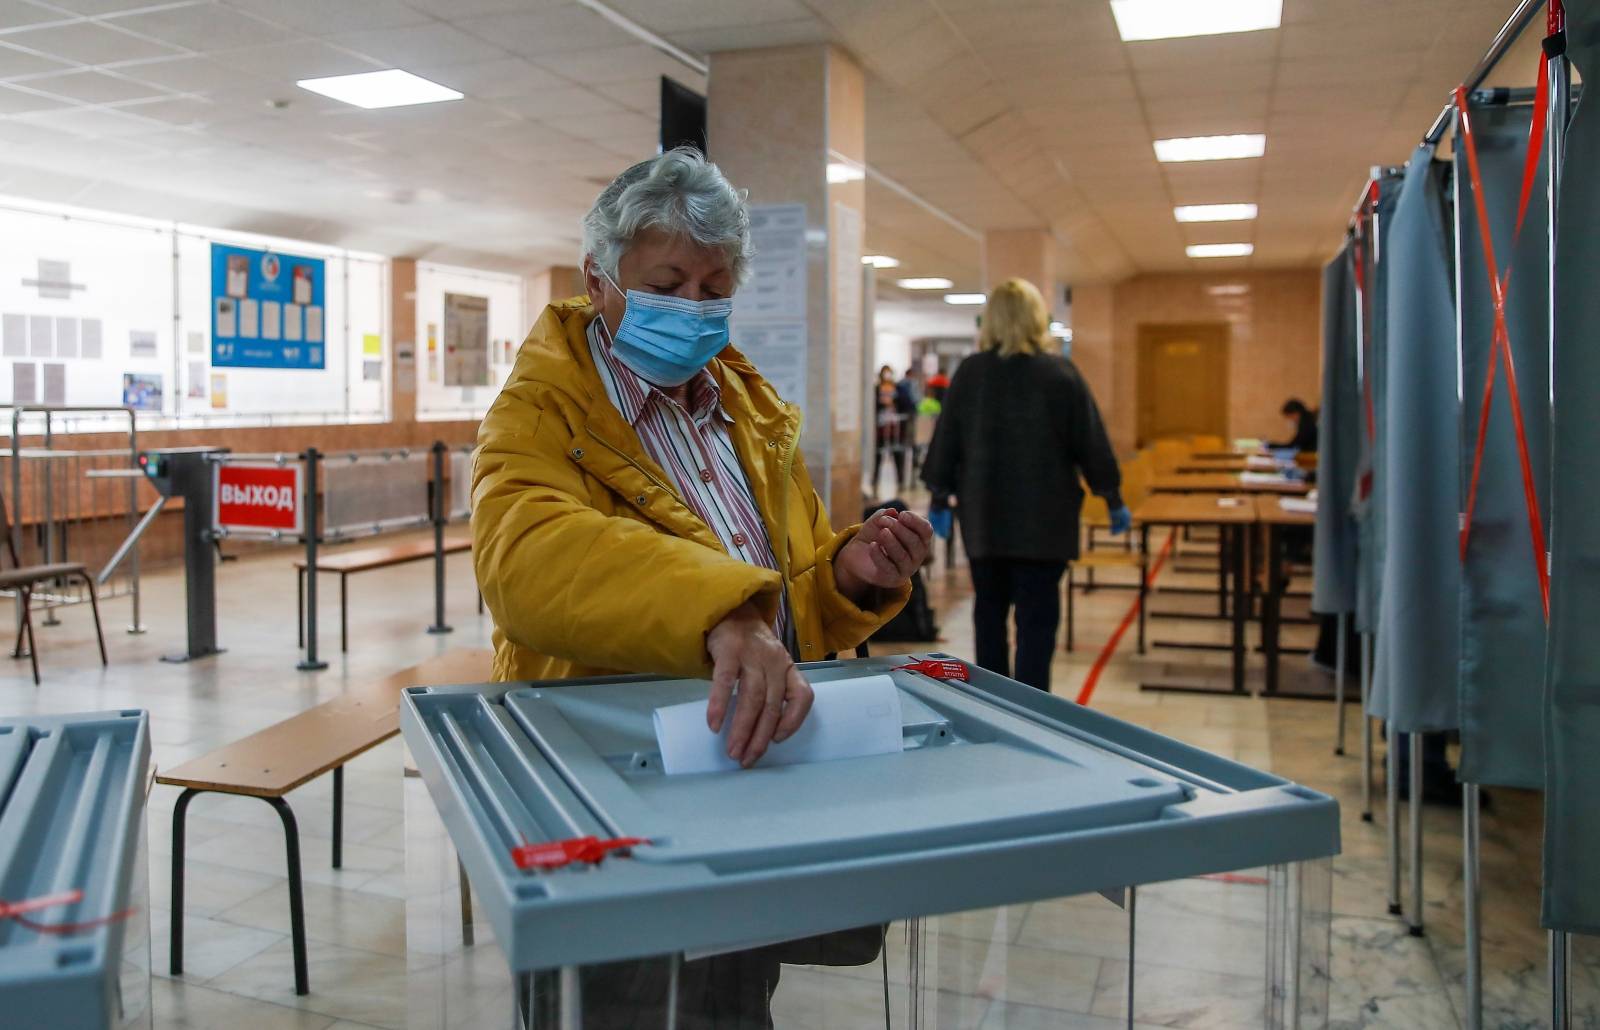 Woman casts a ballot during municipal elections in Tomsk